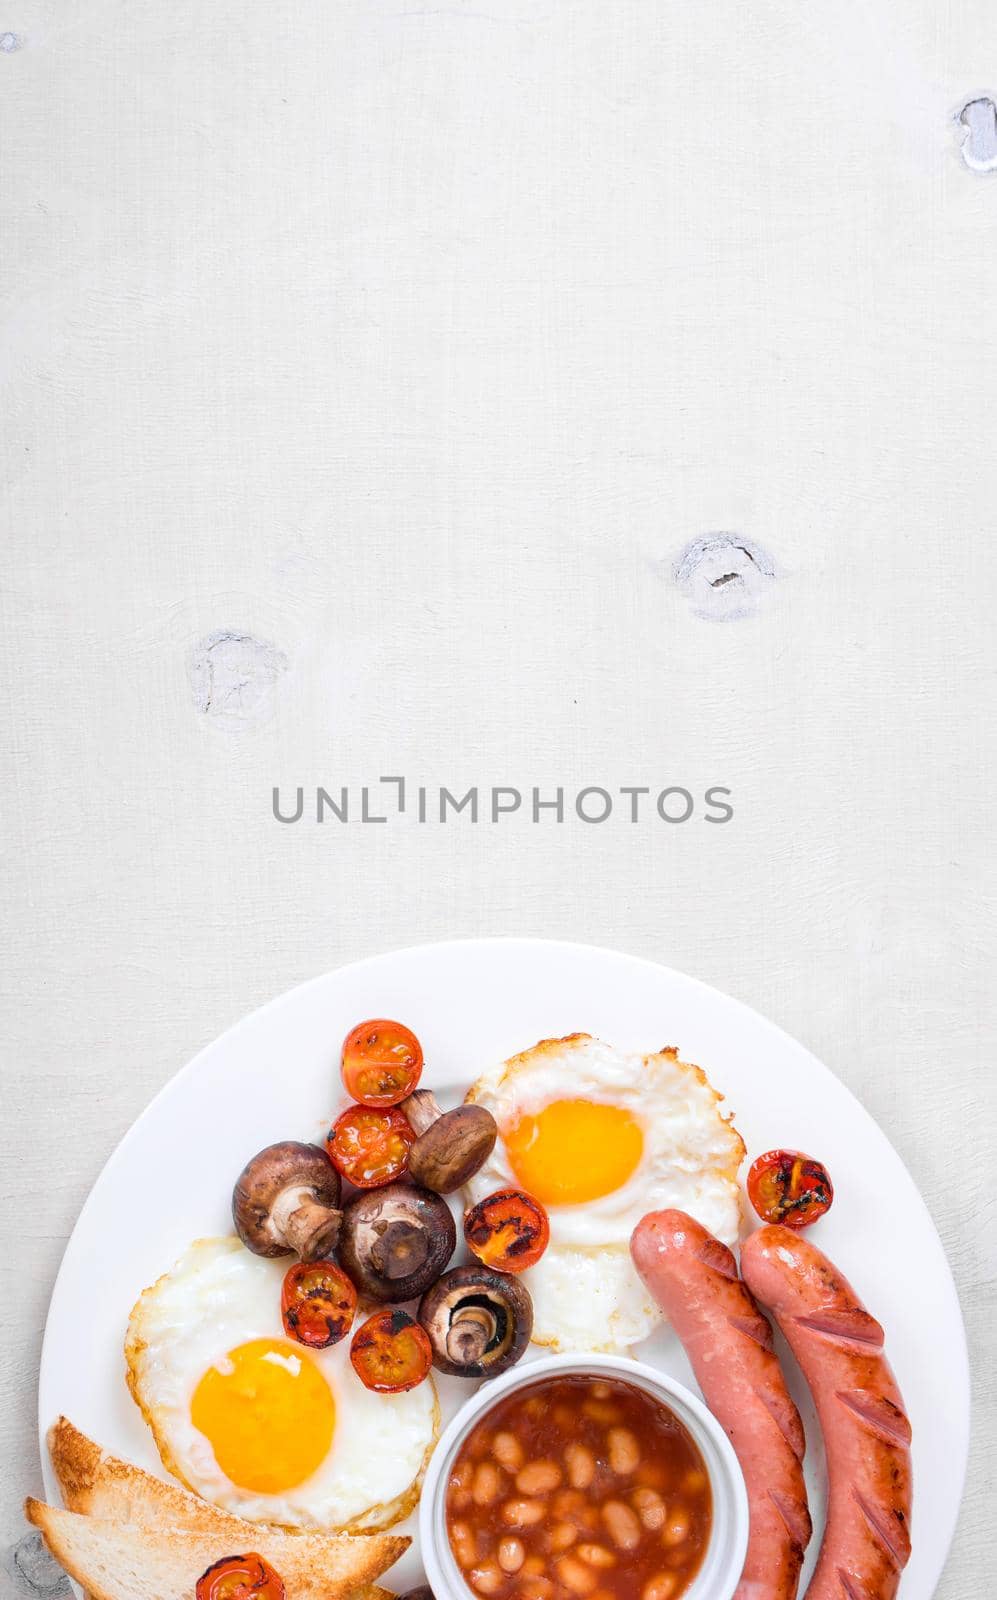 Full english breakfast with fried eggs, tomatoes, sausages, bacon, mushrooms, toasts and beans. Breakfast on a white plate with forks on the white wooden table. Space for text. Background